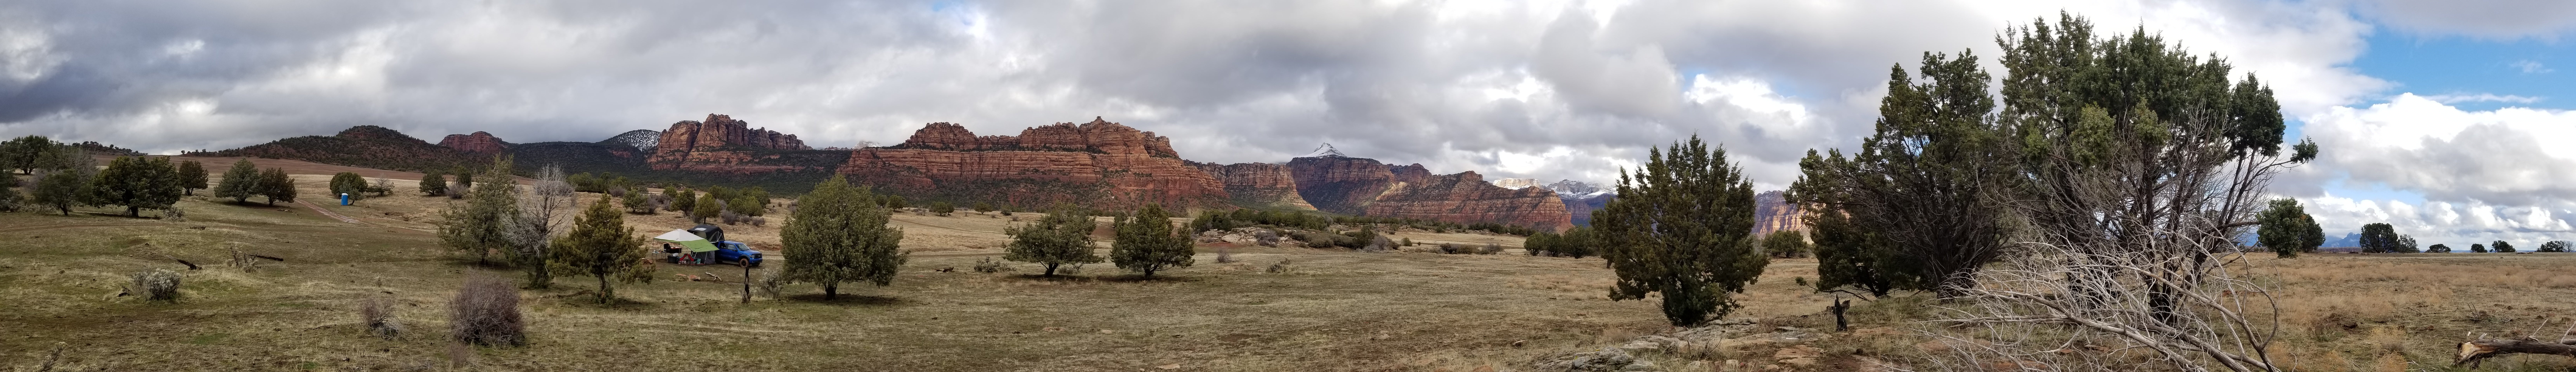 Camper submitted image from Zion Wright Family Ranch - 2